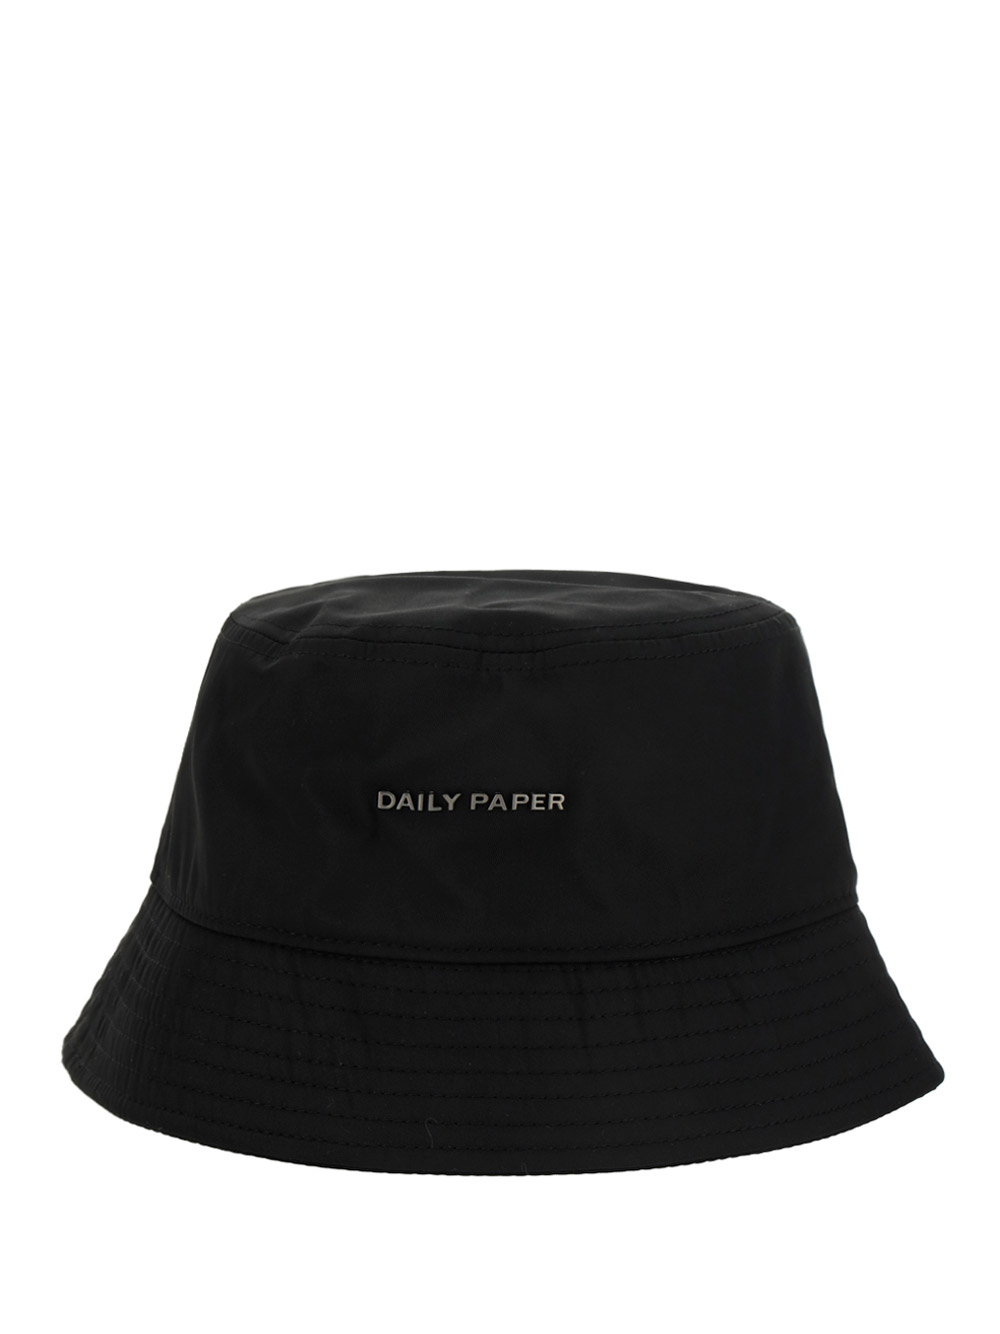 DAILY PAPER BUCKET HAT,2122048_BLACK